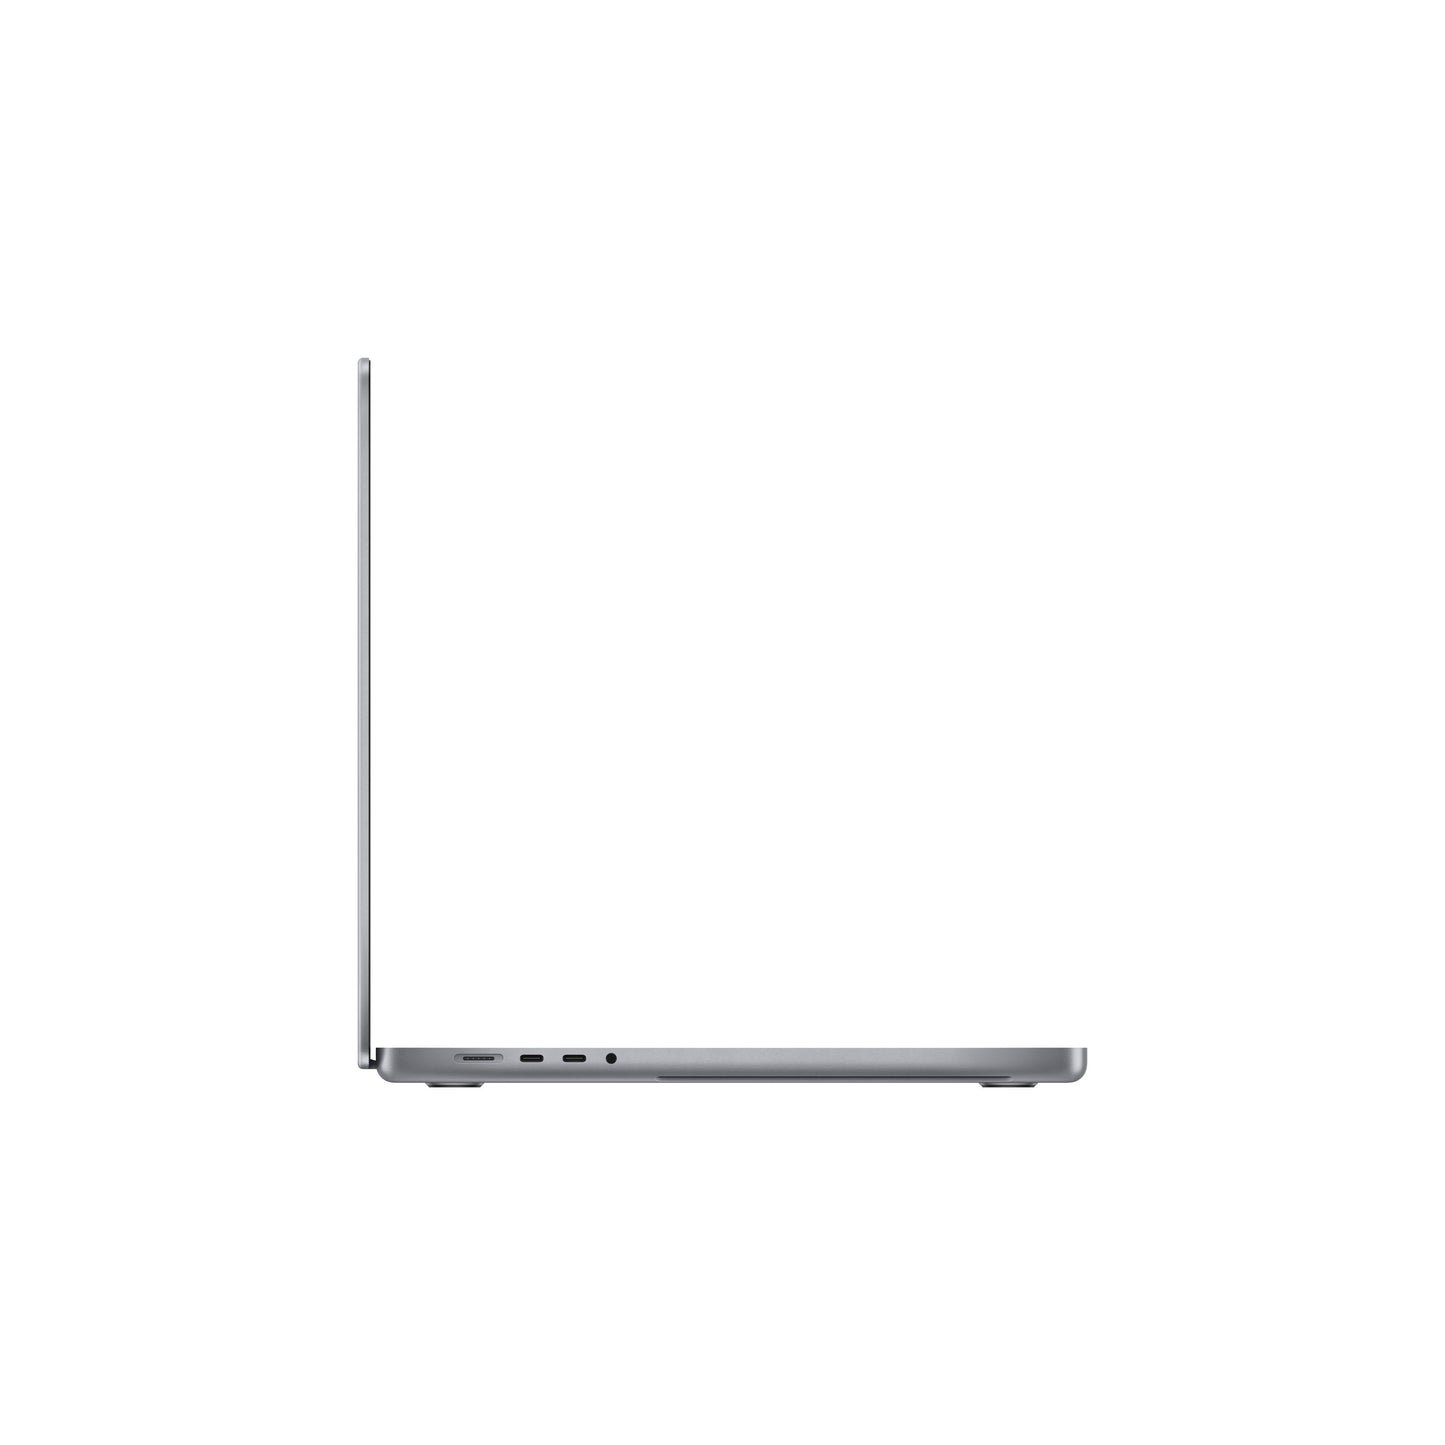 16-inch MacBook Pro: Apple M1 Pro chip with 10?core CPU and 16?core GPU, 512GB SSD - Space Grey